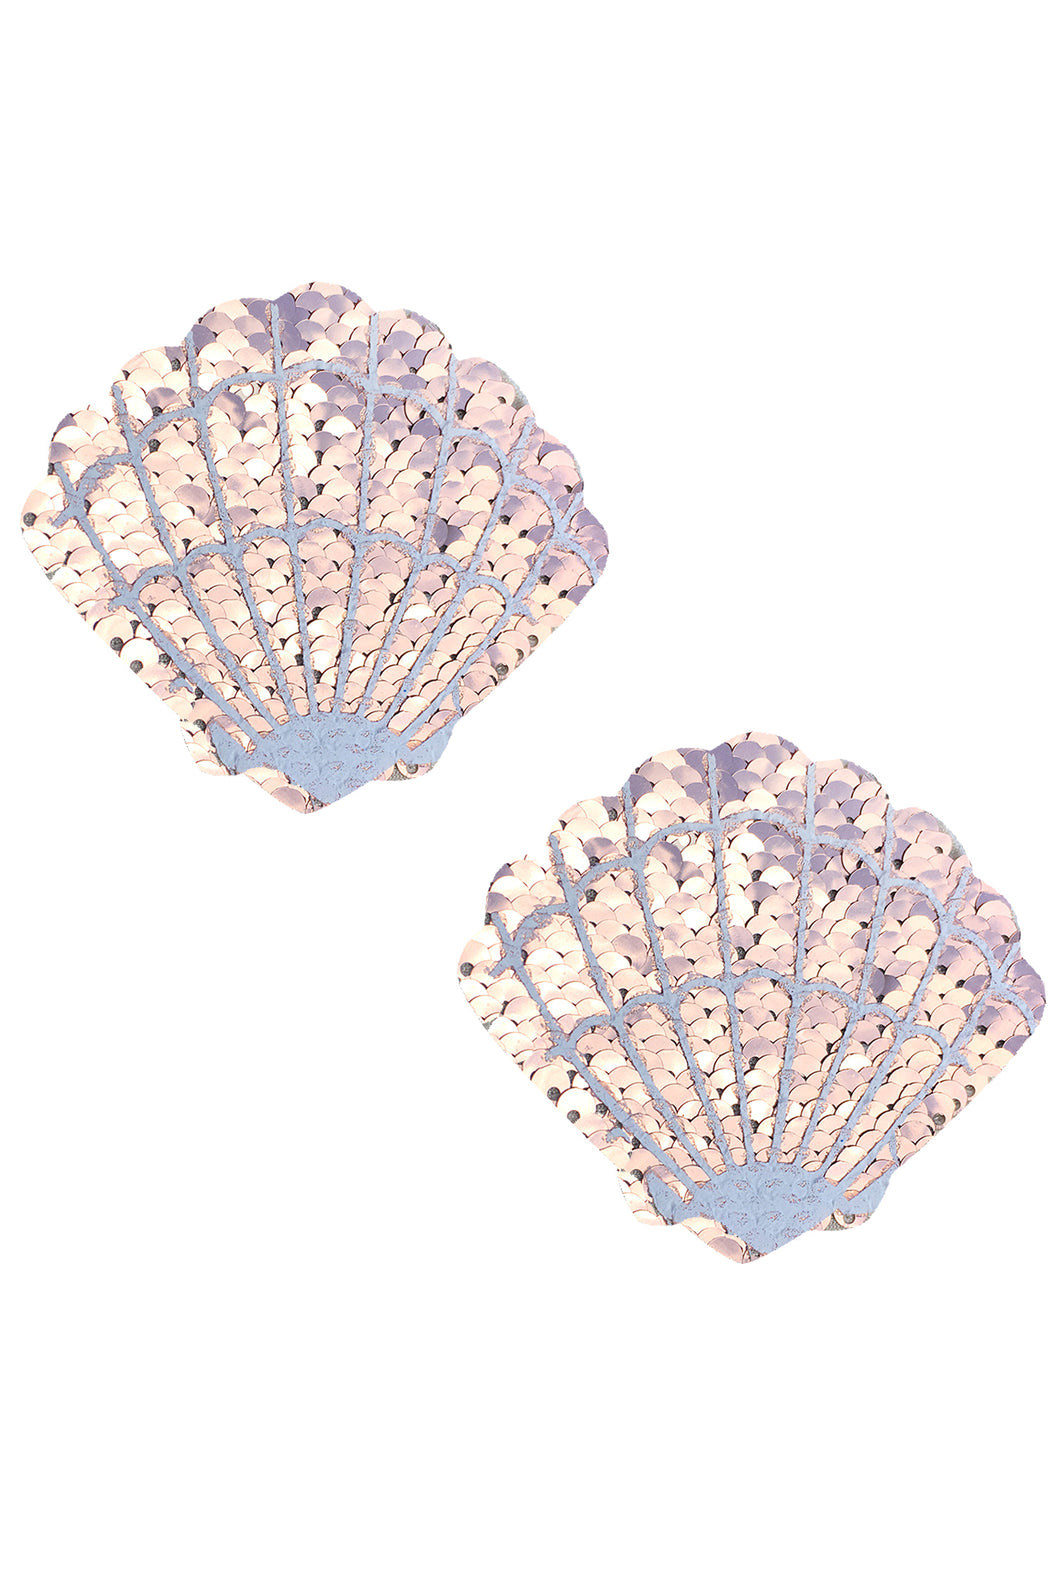 Champagne Showers Sequin Mermaid Shell Pasties